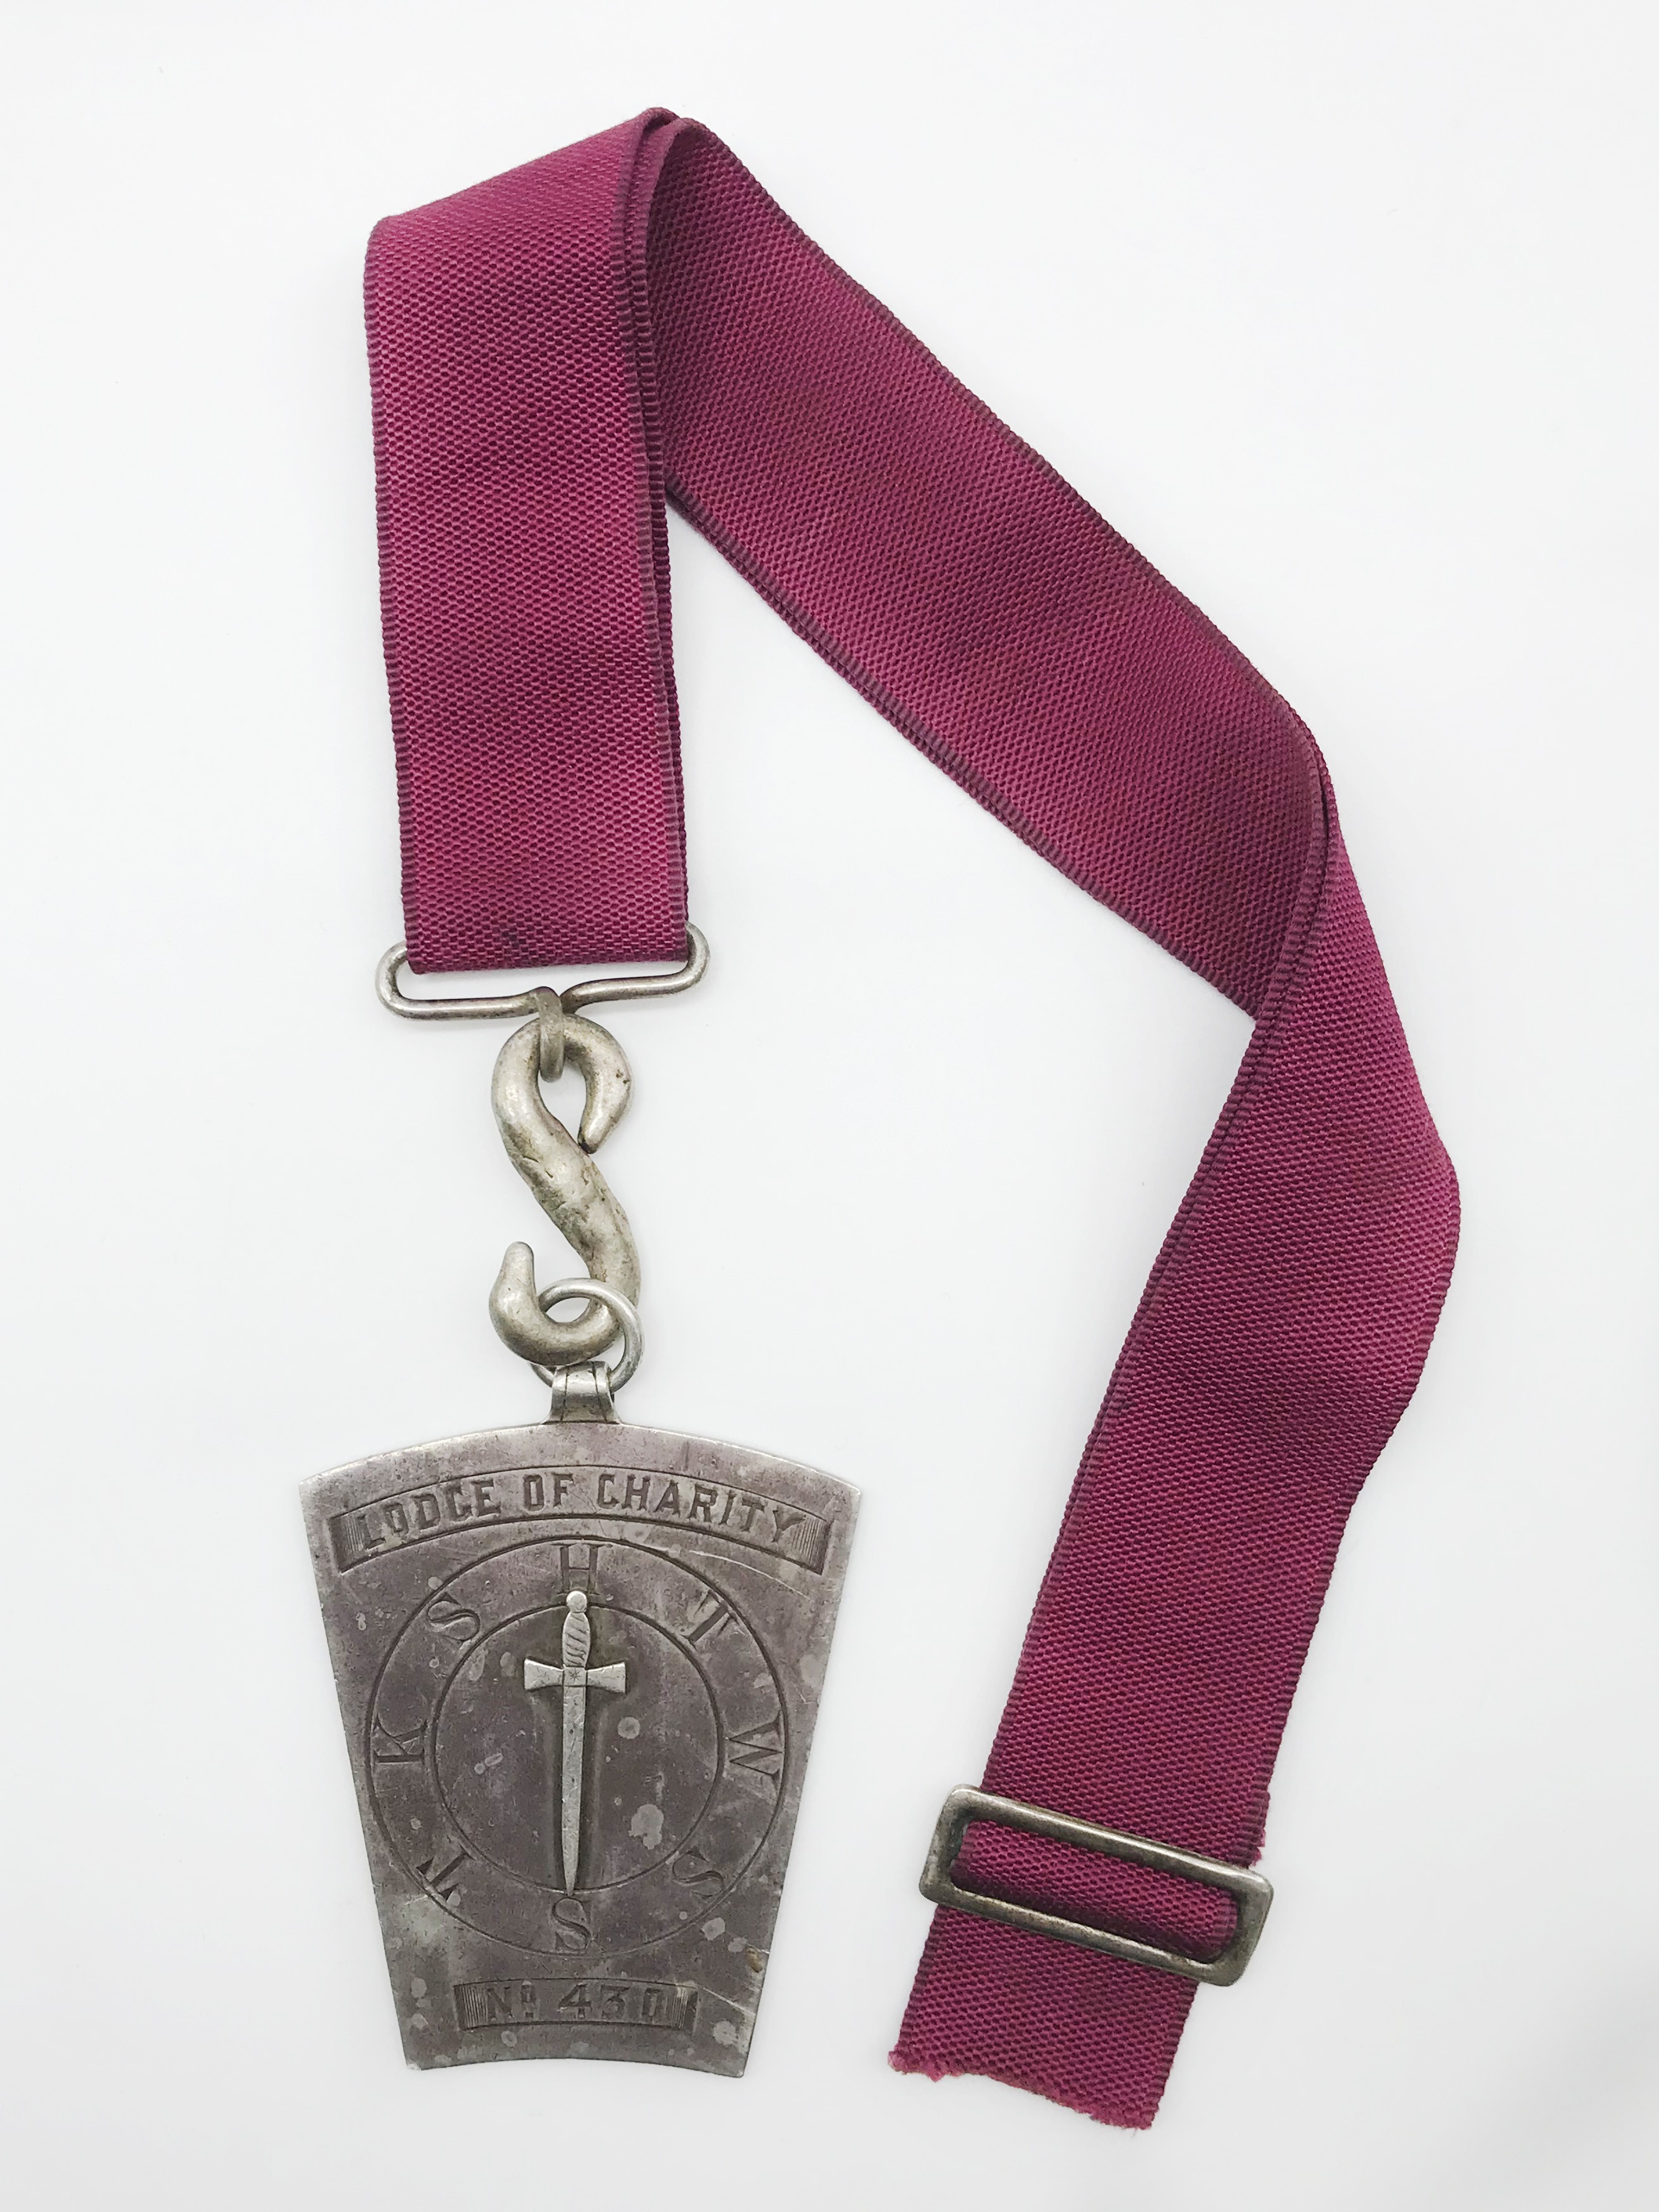 LARGE HALLMARKED SILVER MASONIC JEWEL FOR LODGE OF CHARITY - Image 2 of 6